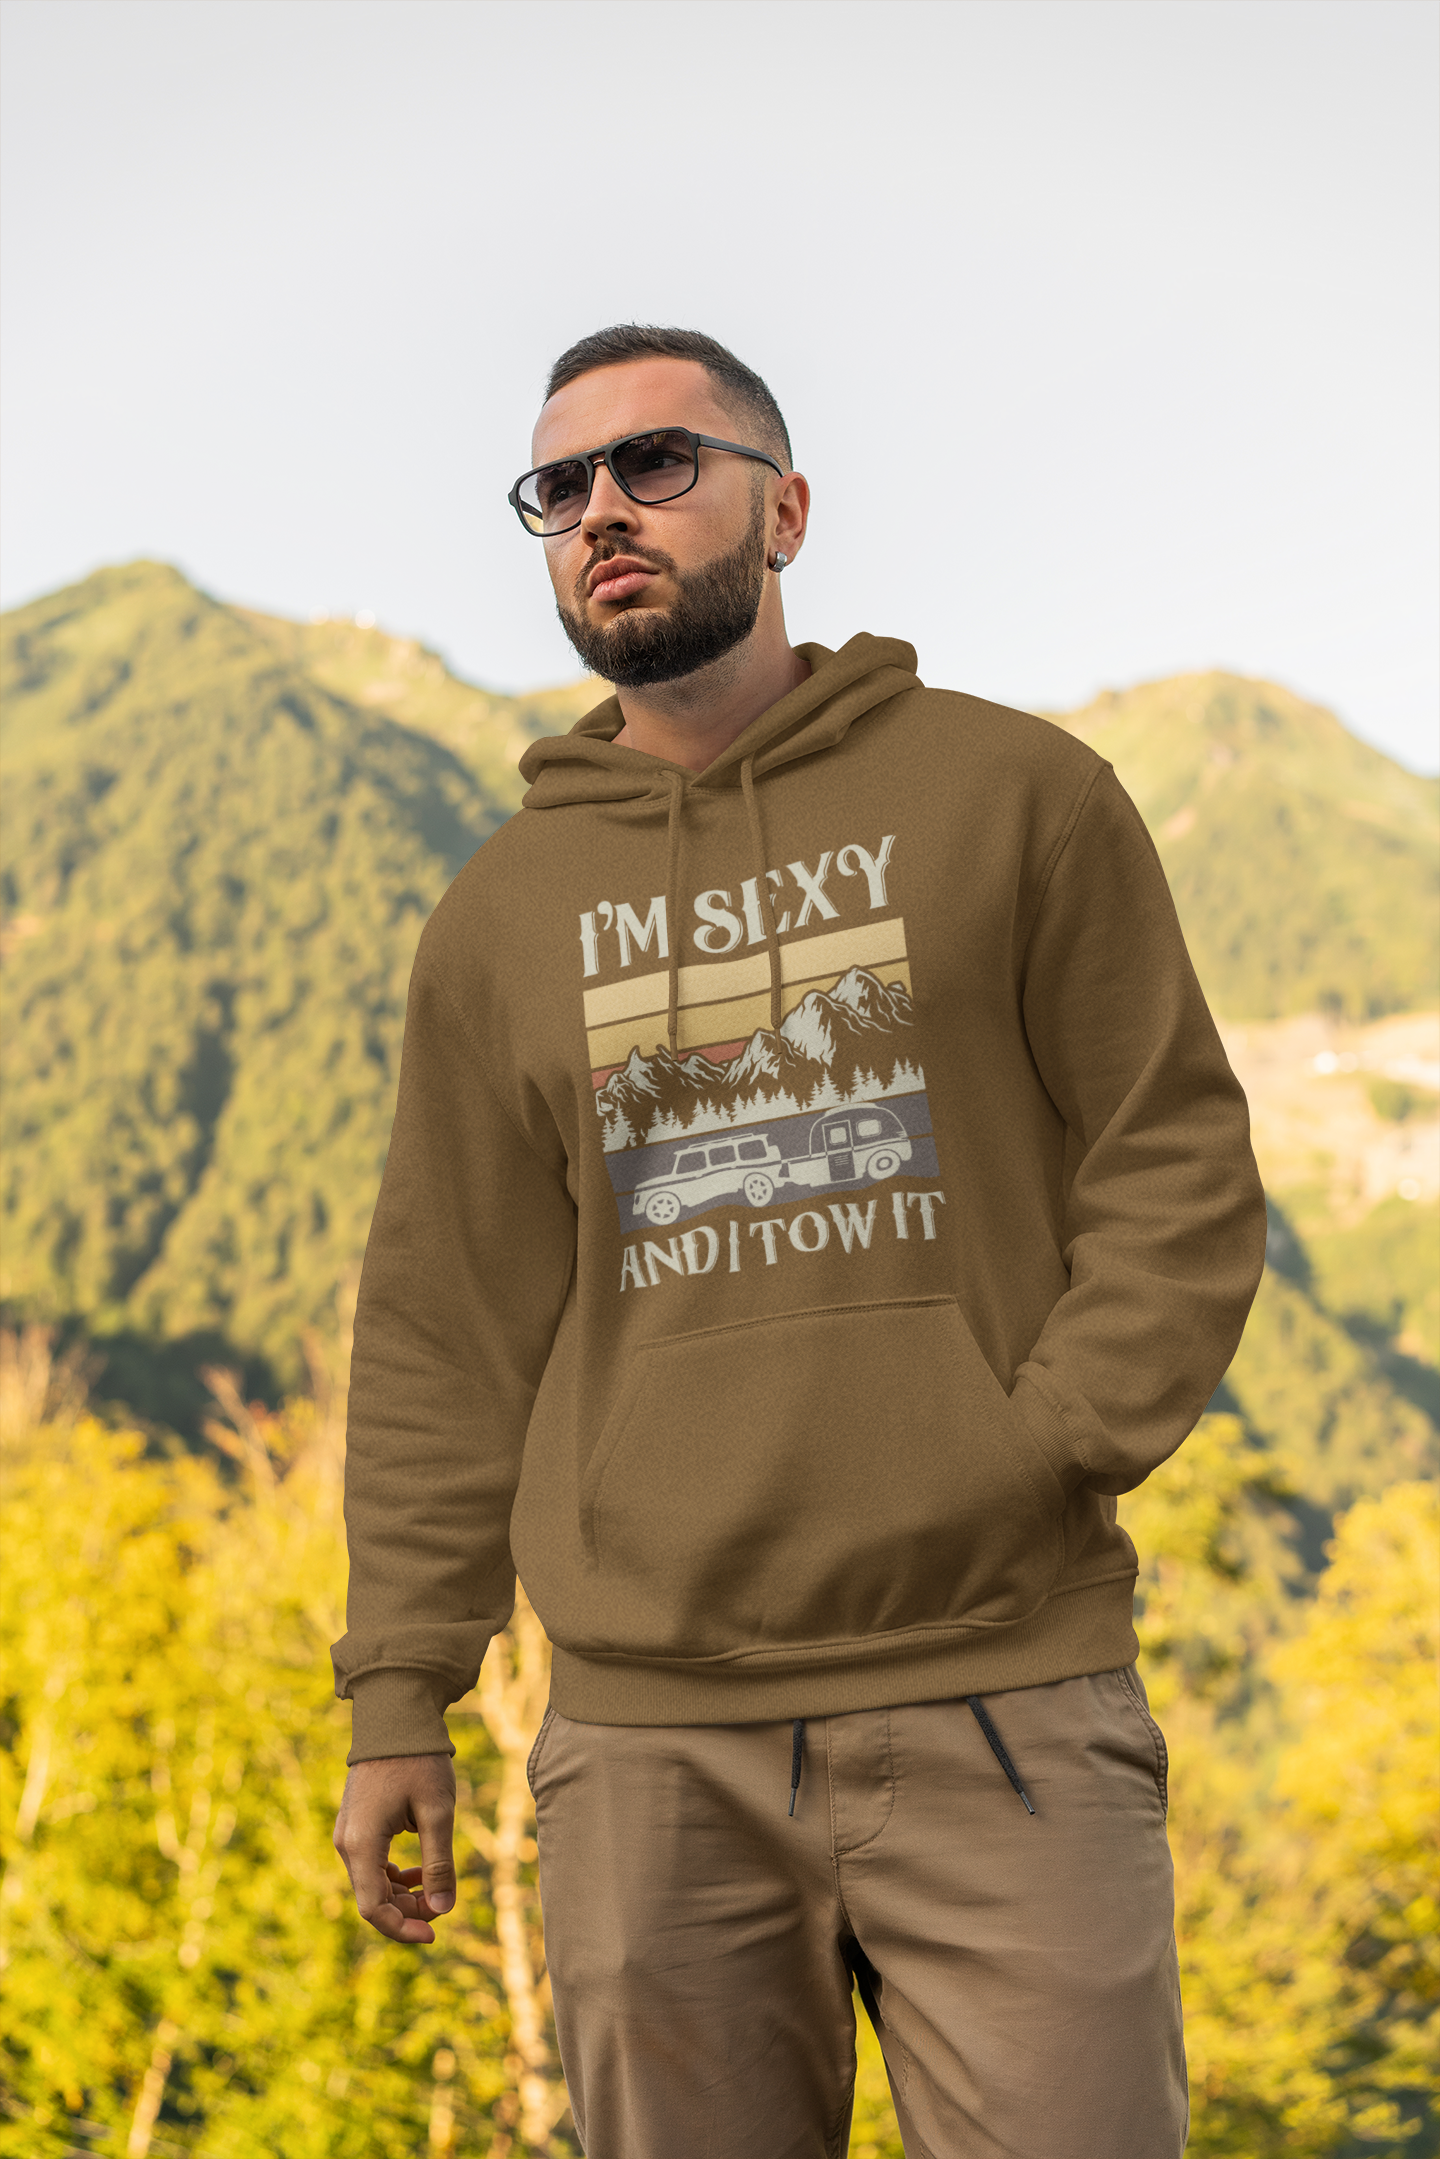 I'm Sexy and I tow; it Pull-over hoodie sweatshirt